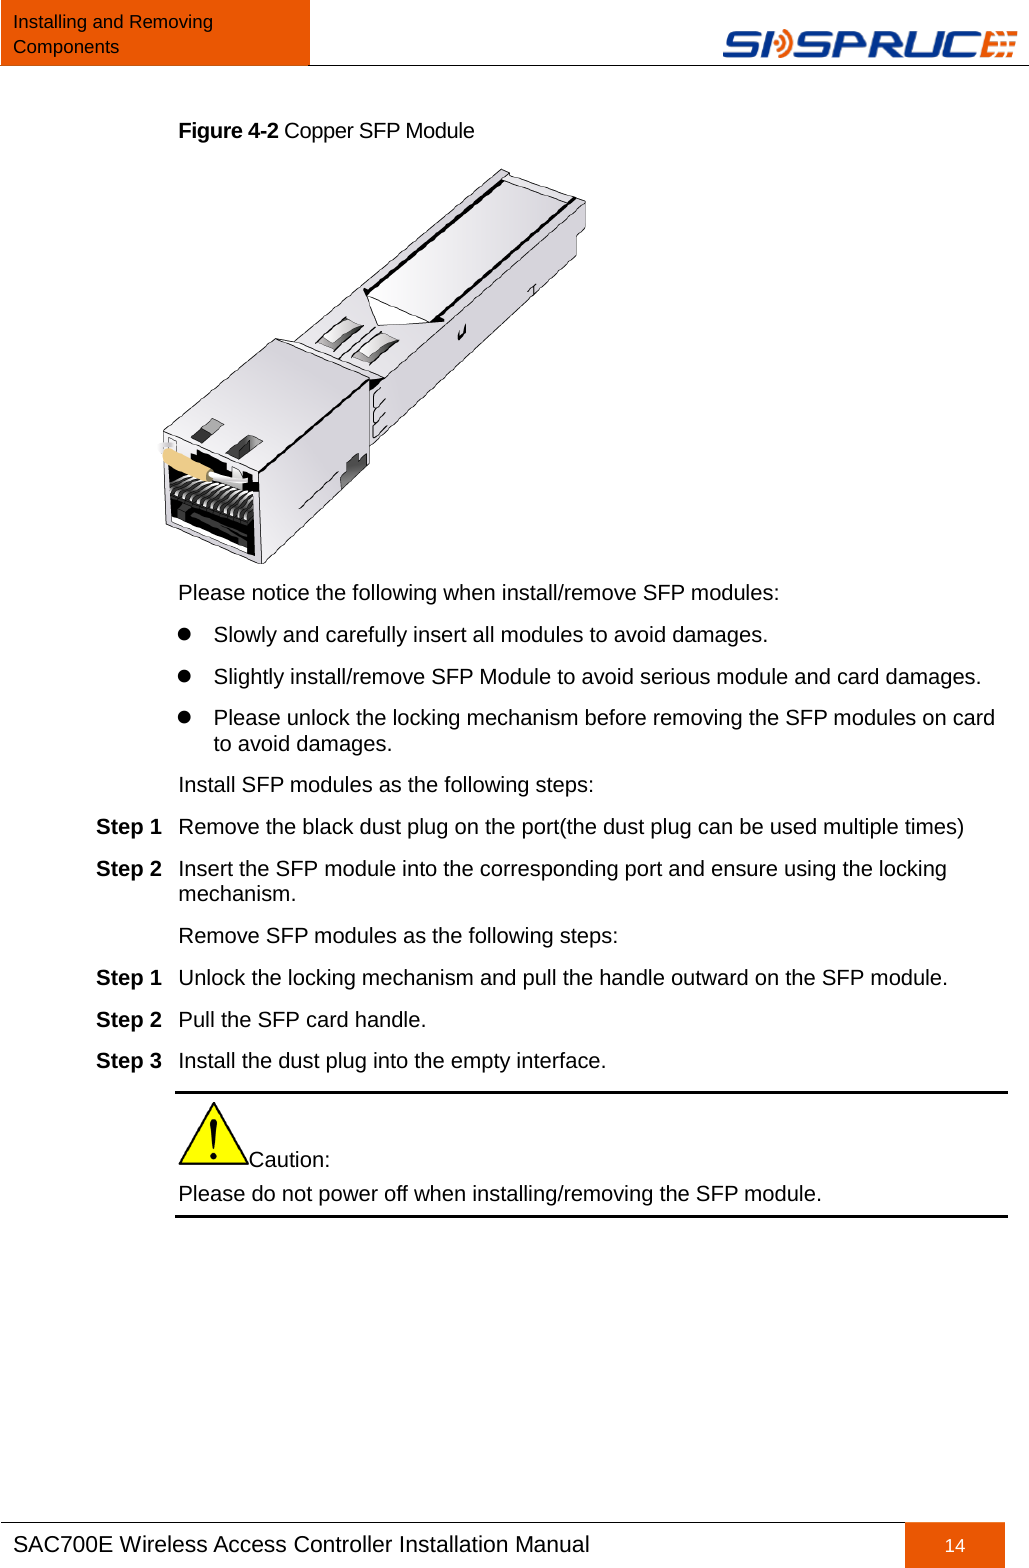 Installing and Removing Components   SAC700E Wireless Access Controller Installation Manual 14  Figure 4-2 Copper SFP Module  Please notice the following when install/remove SFP modules:  Slowly and carefully insert all modules to avoid damages.  Slightly install/remove SFP Module to avoid serious module and card damages.  Please unlock the locking mechanism before removing the SFP modules on card to avoid damages. Install SFP modules as the following steps: Step 1 Remove the black dust plug on the port(the dust plug can be used multiple times) Step 2 Insert the SFP module into the corresponding port and ensure using the locking mechanism. Remove SFP modules as the following steps: Step 1 Unlock the locking mechanism and pull the handle outward on the SFP module. Step 2 Pull the SFP card handle. Step 3 Install the dust plug into the empty interface. Caution:   Please do not power off when installing/removing the SFP module.  